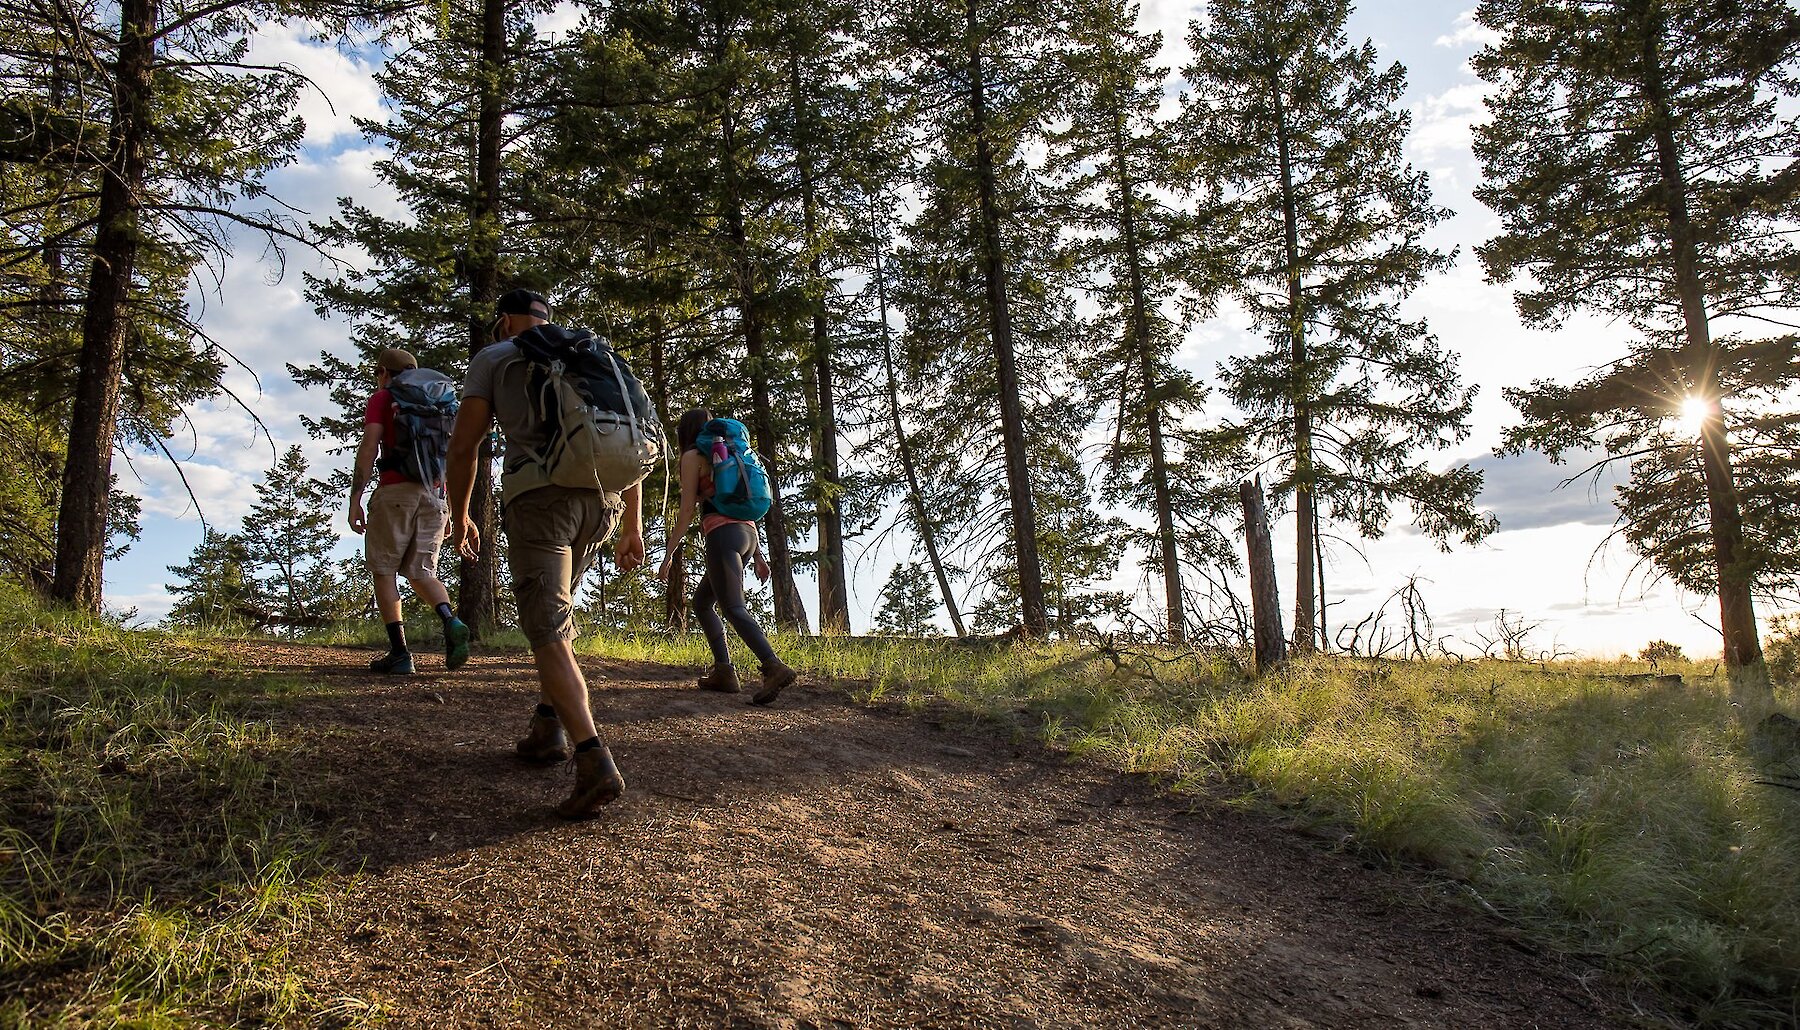 A group of spring hikers along the Battle Bluff trail in Kamloops, British Columbia.